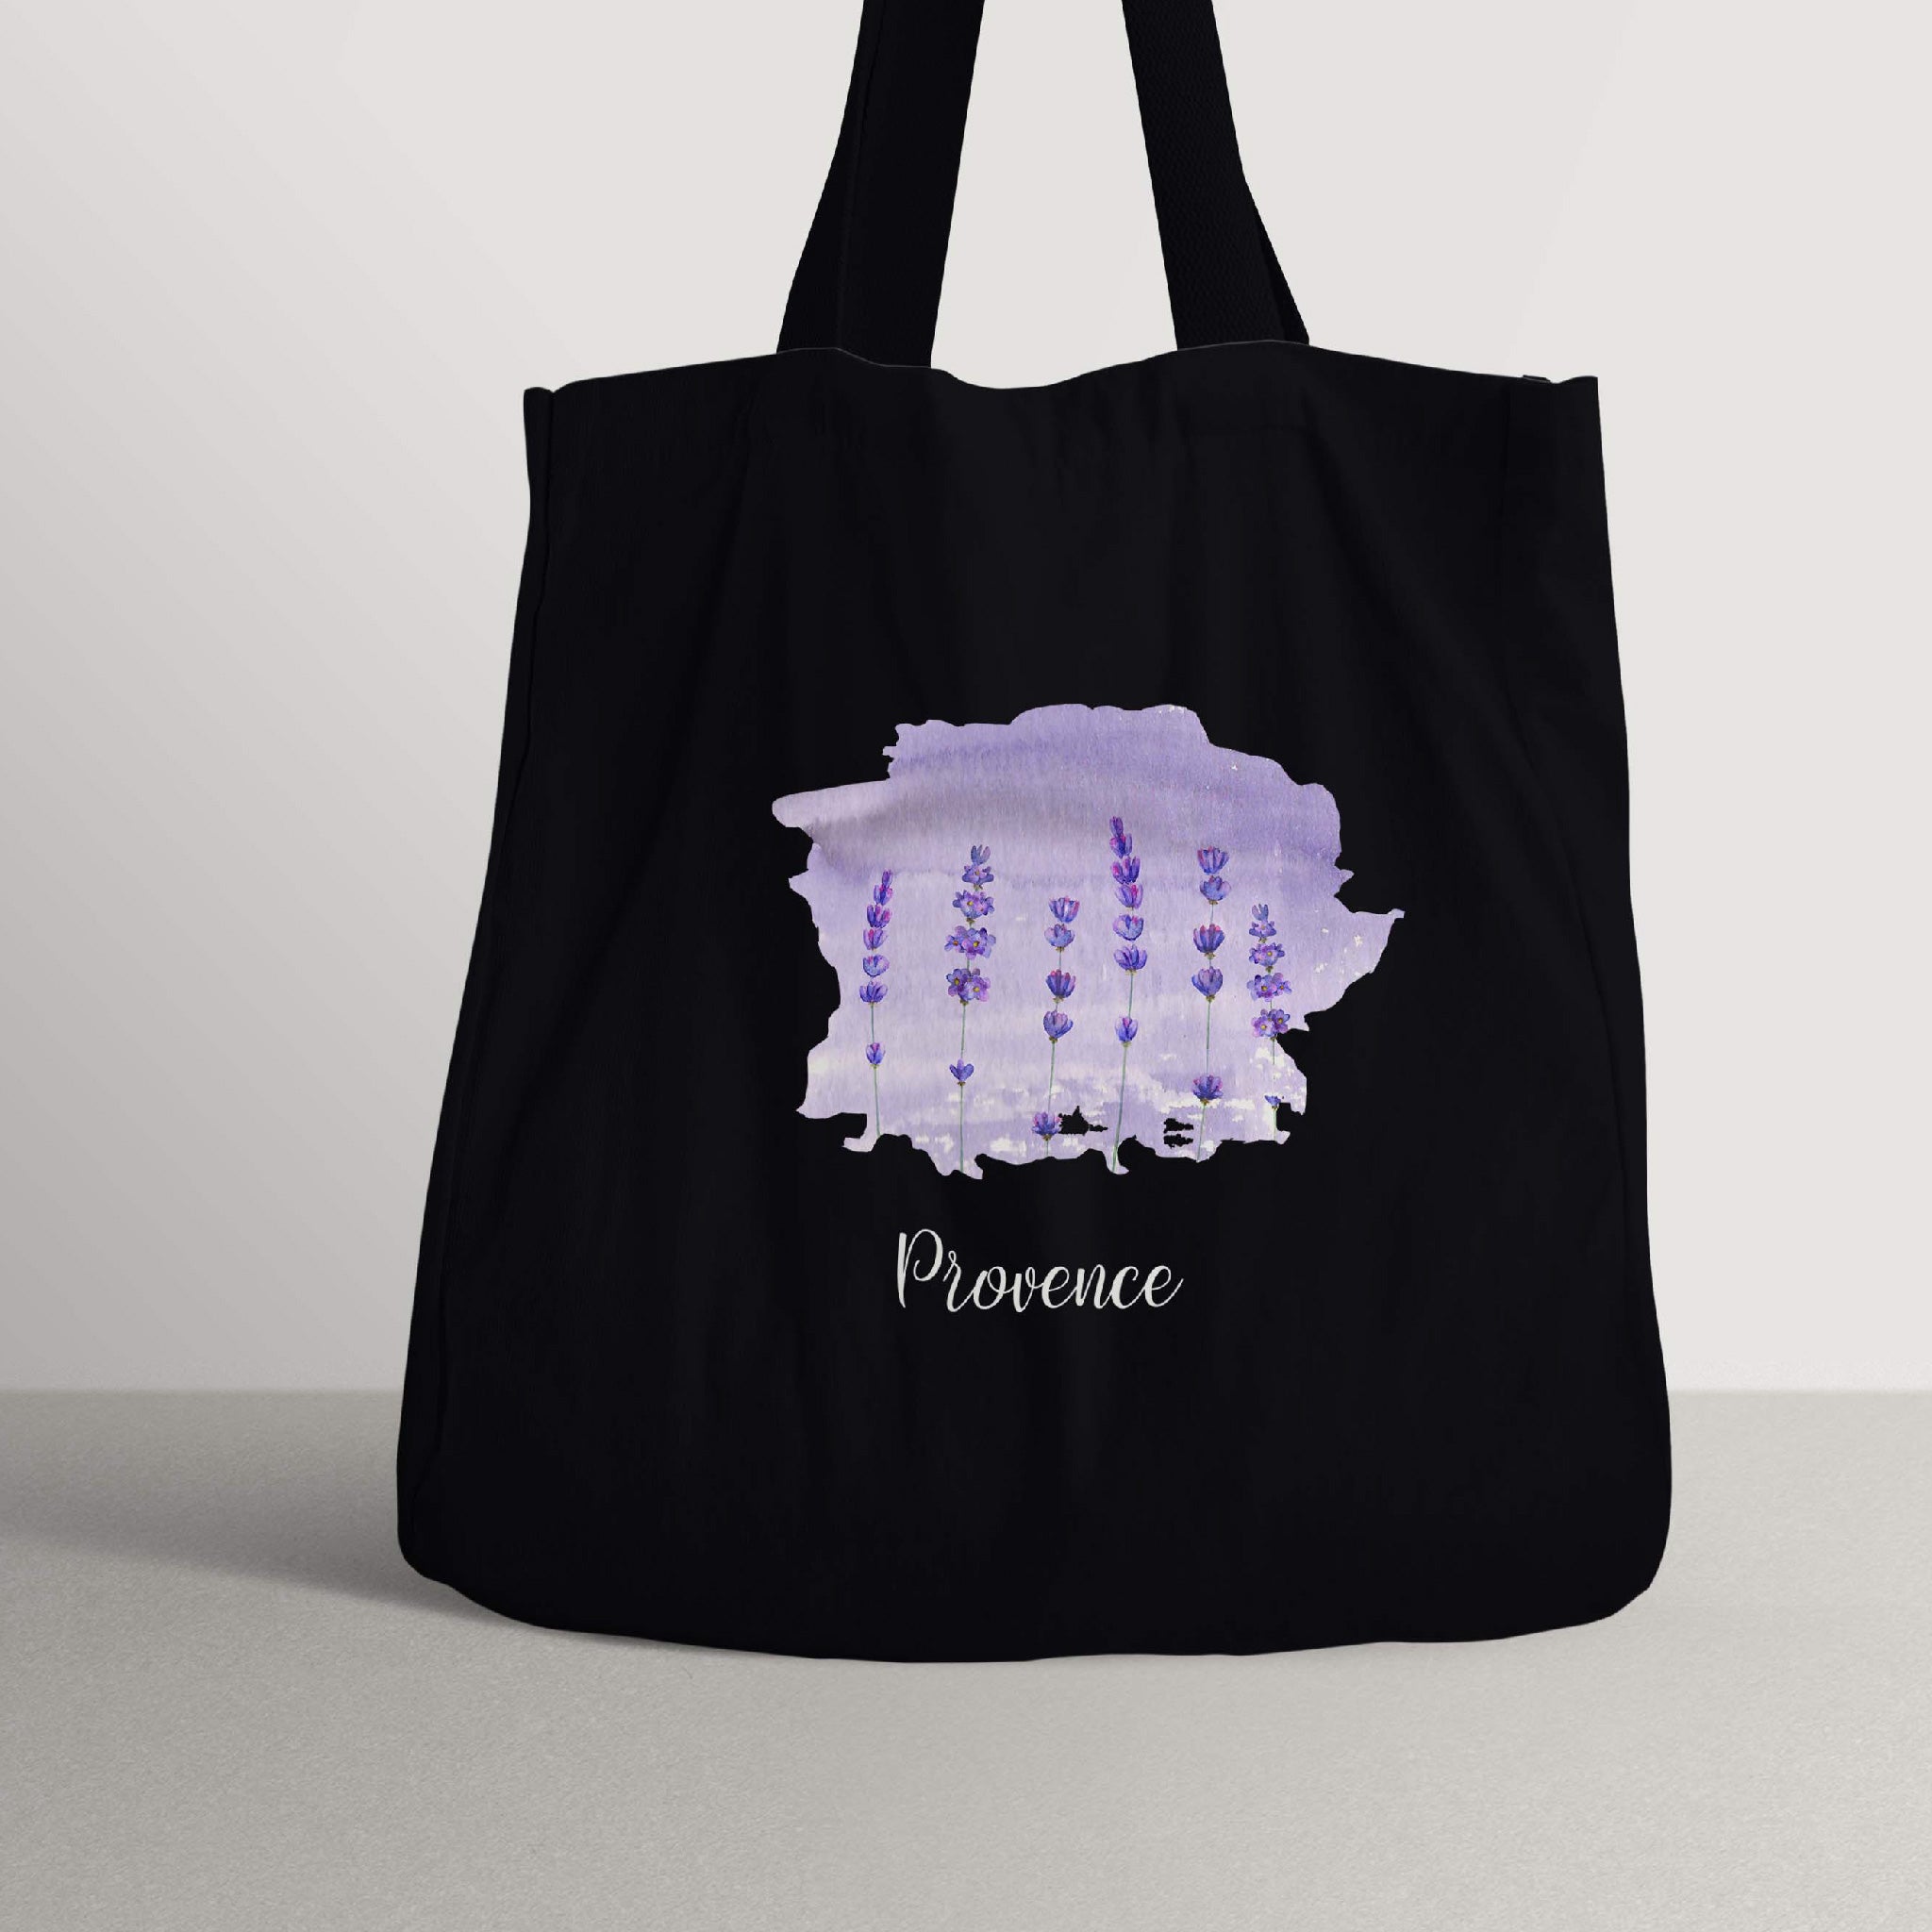 Provence Tote Bag | of France